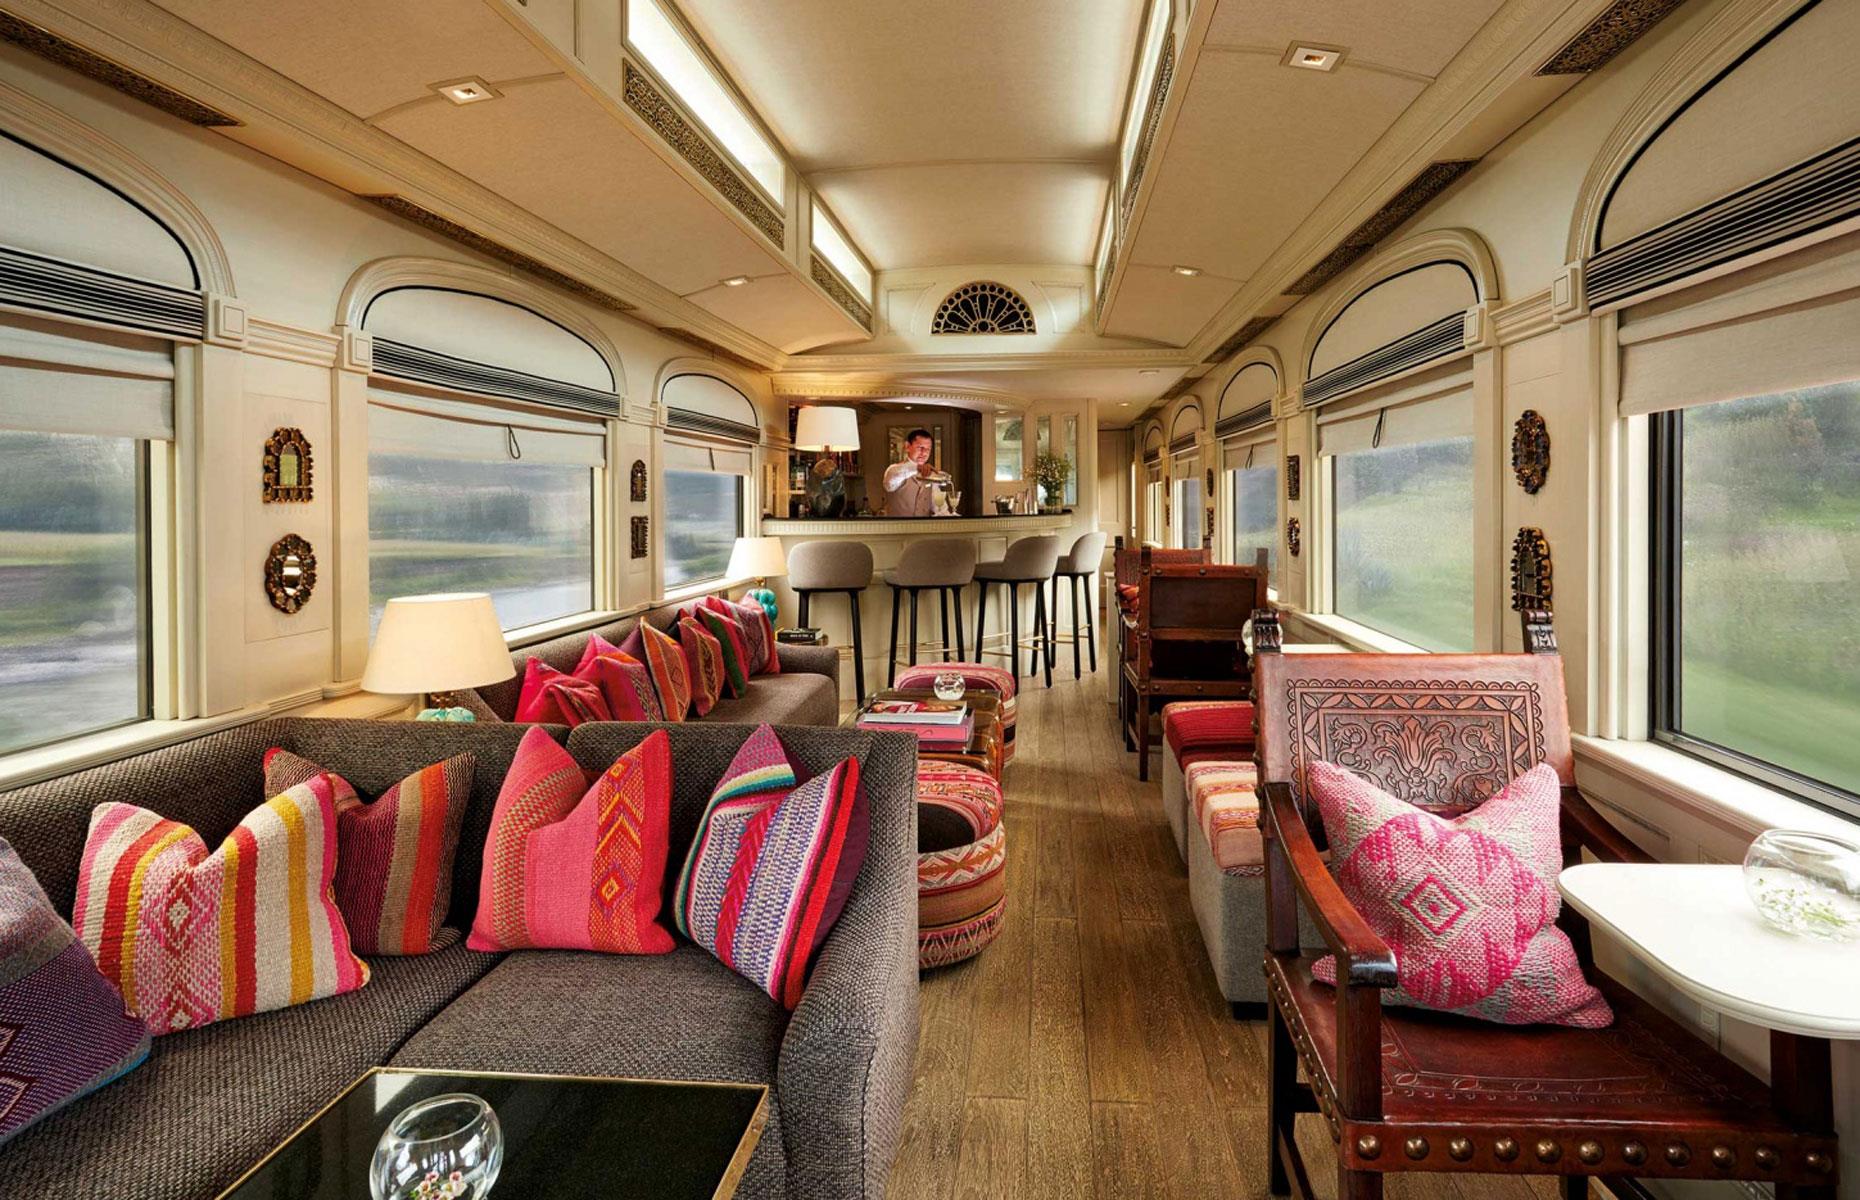 South America's classiest train, the Andean Explorer, which connects the ancient Peruvian cities of Cusco and Arequipa, is part of the Belmond group too. Decorated with furnishings that marry traditional Peruvian style with Art Deco, the train is a real gem. Other deluxe trains that are now owned by Bernard Arnault's LVMH include the Belmond Grand Hibernian, which operates in Ireland, and the Belmond British Pullman.